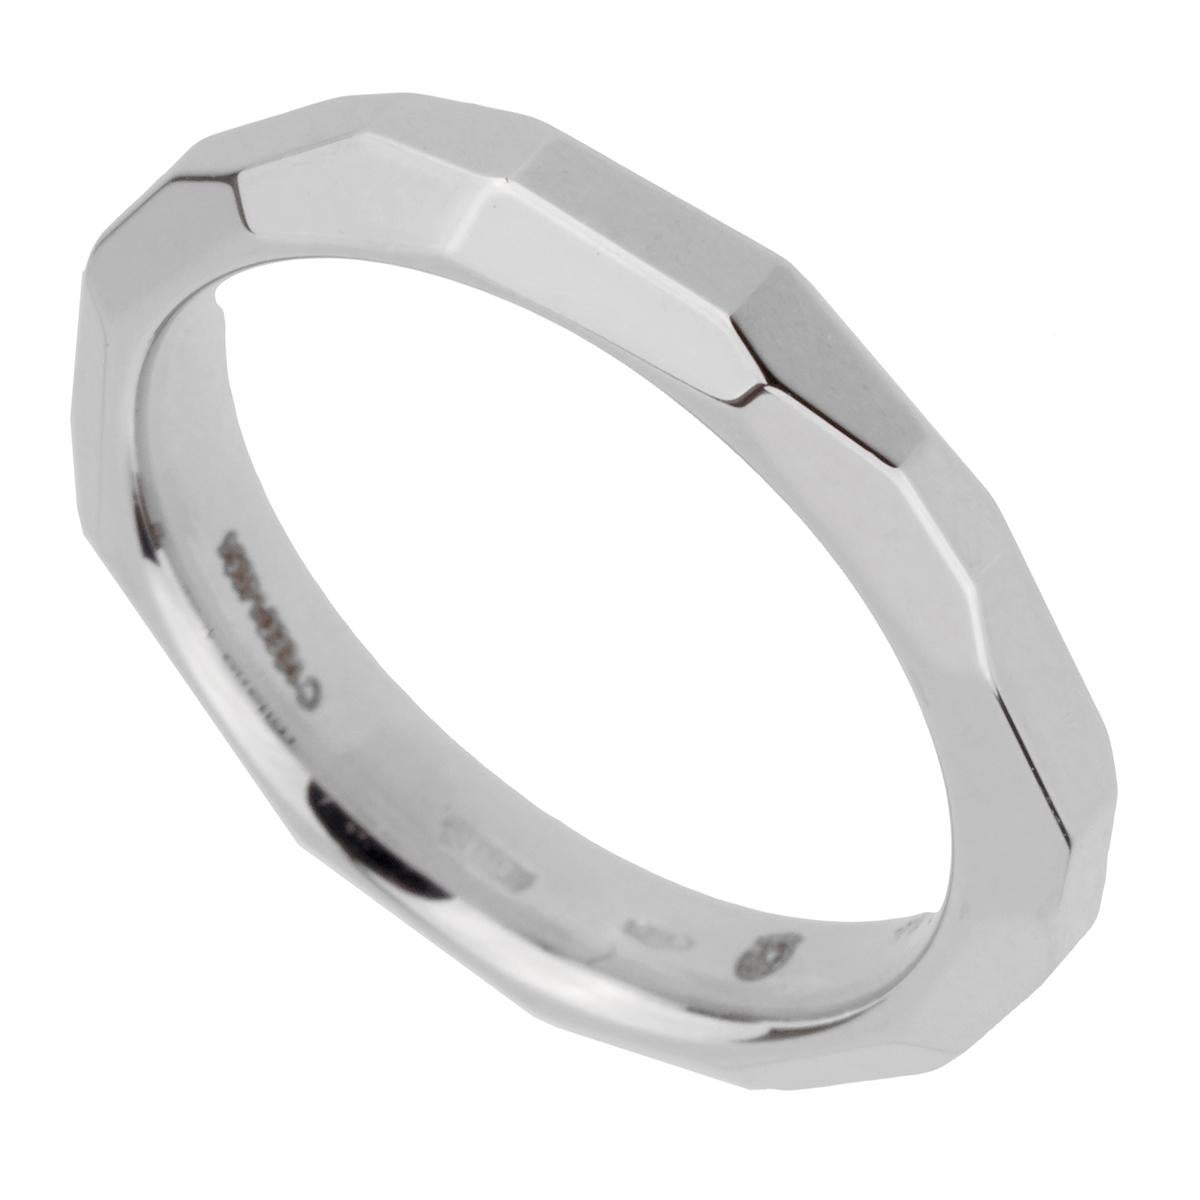 A chic white gold Pomellato band style ring crafted in 18k white gold, The ring measures a size 5 and can be resized.

Sku: 2376